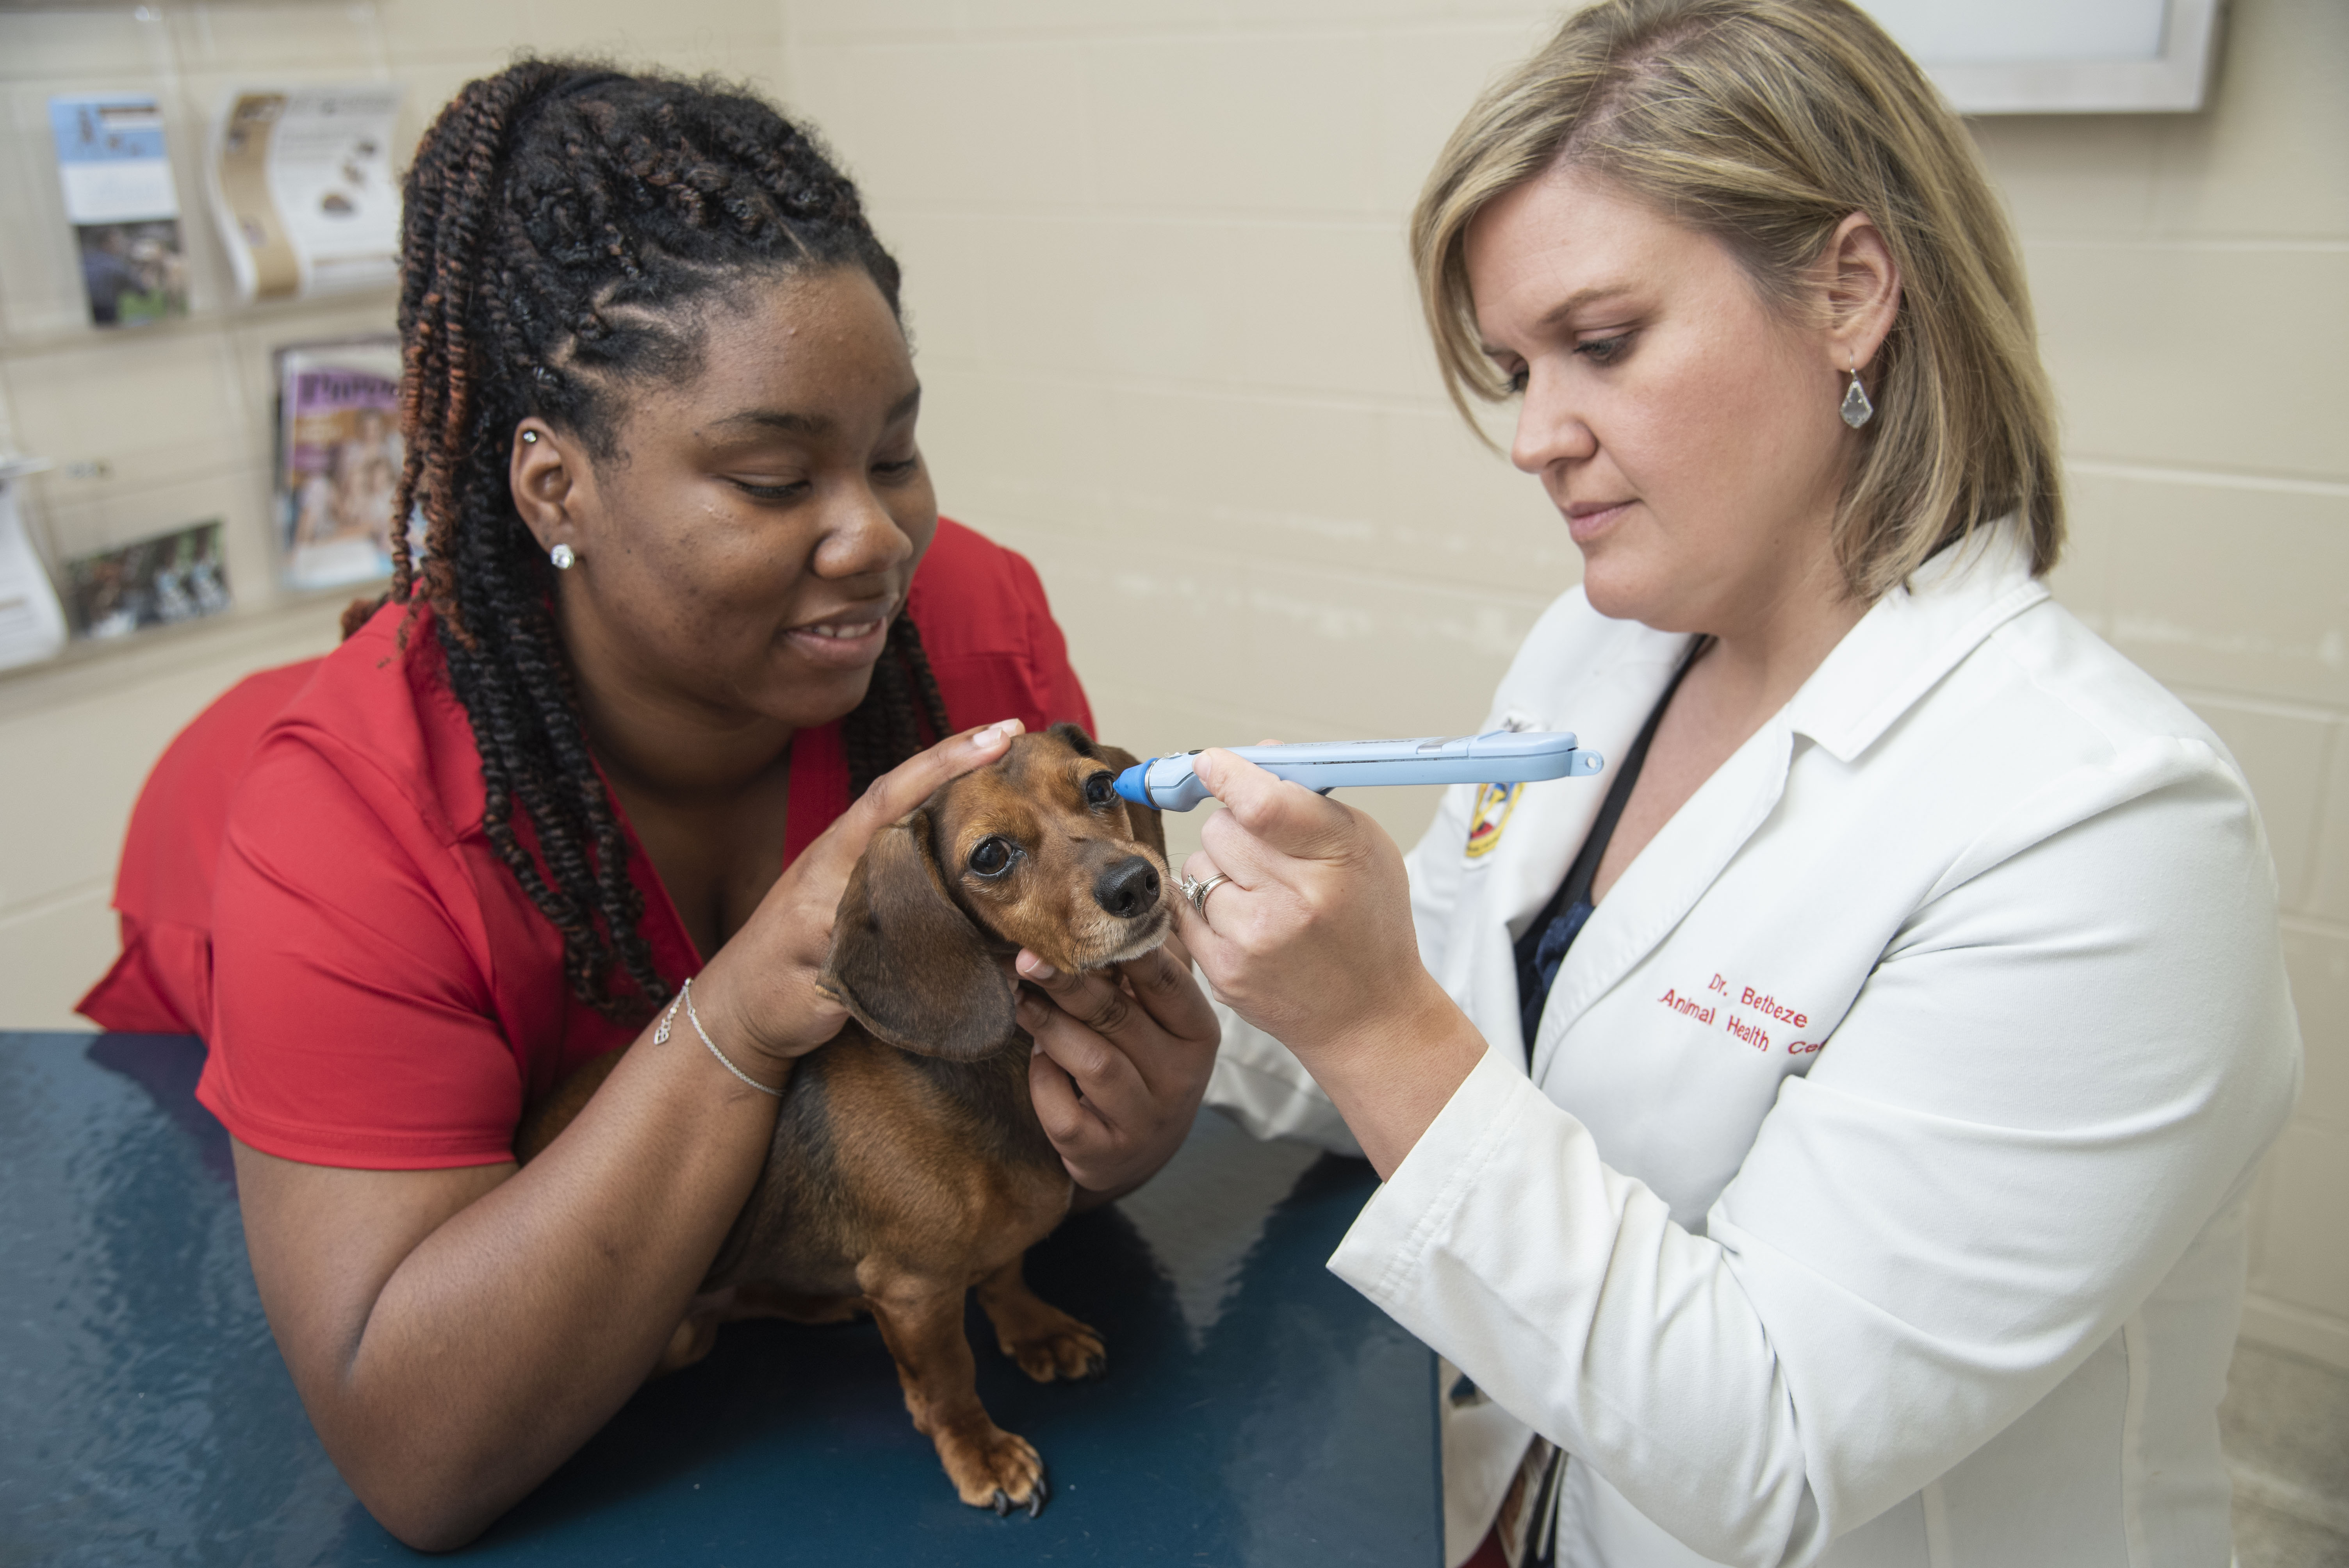 A technician holds a dachshund still while a veterinarian examines its eye